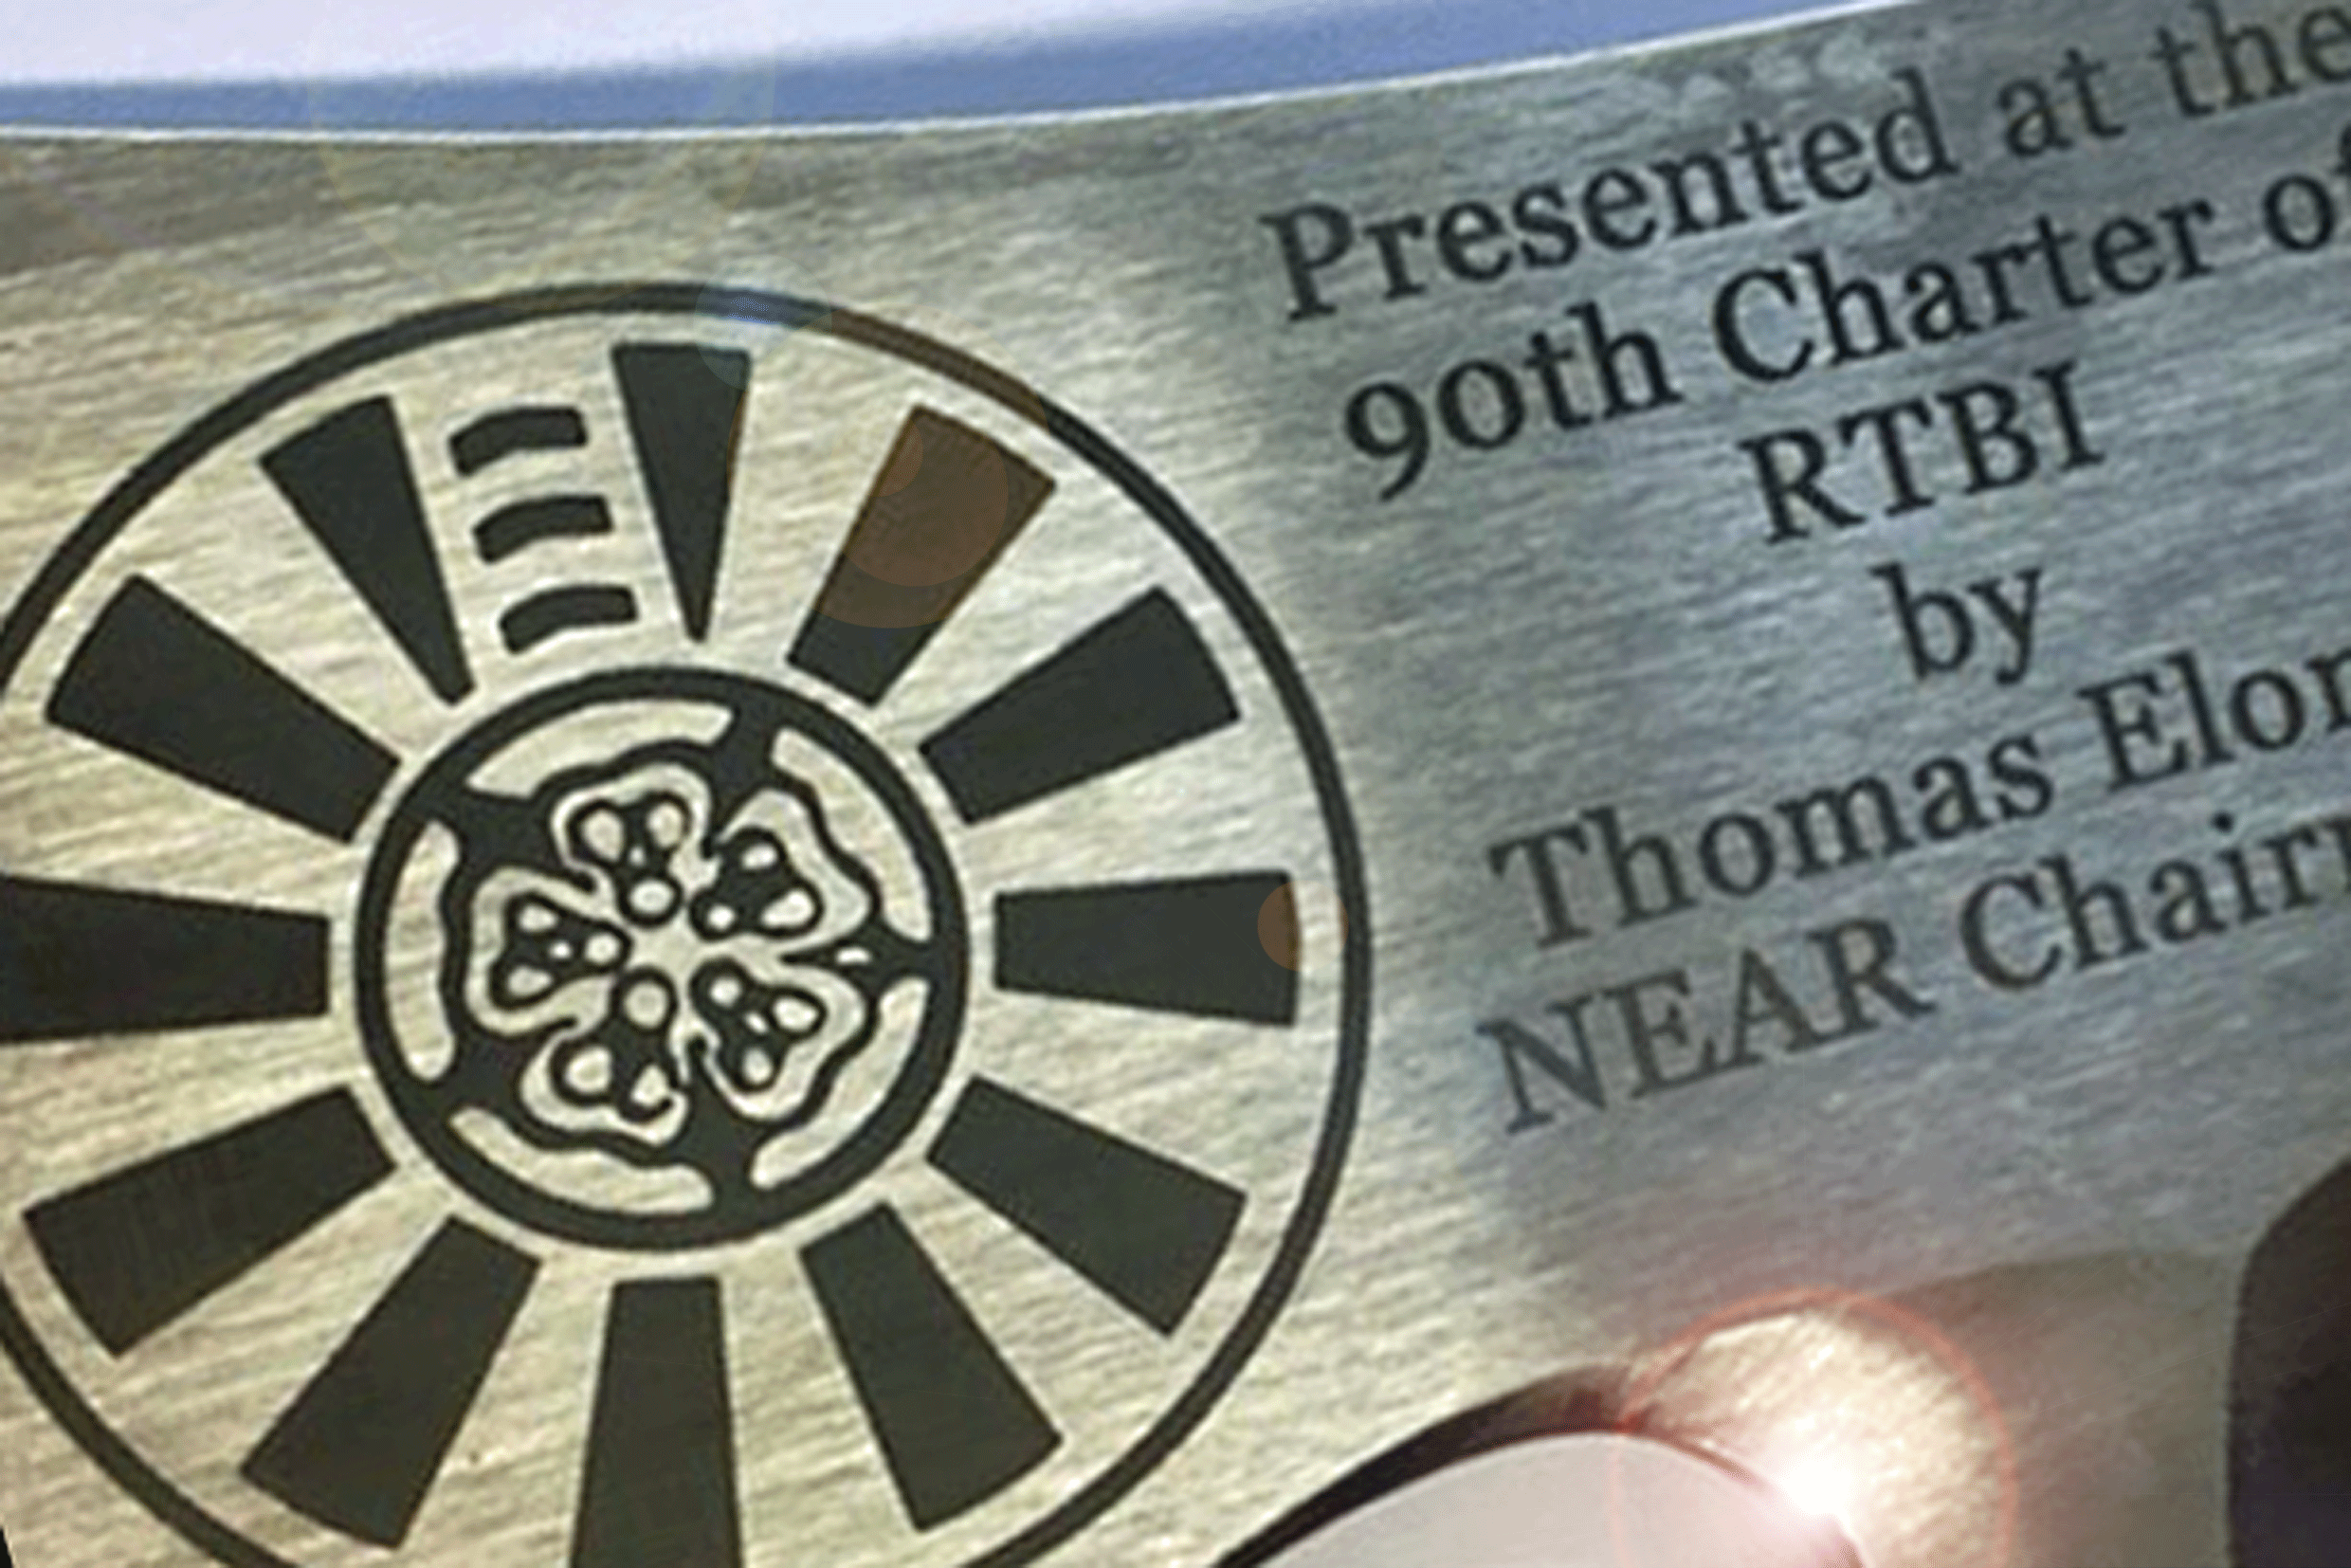 Etched stainless steel axe - engraved for The Round Table charity